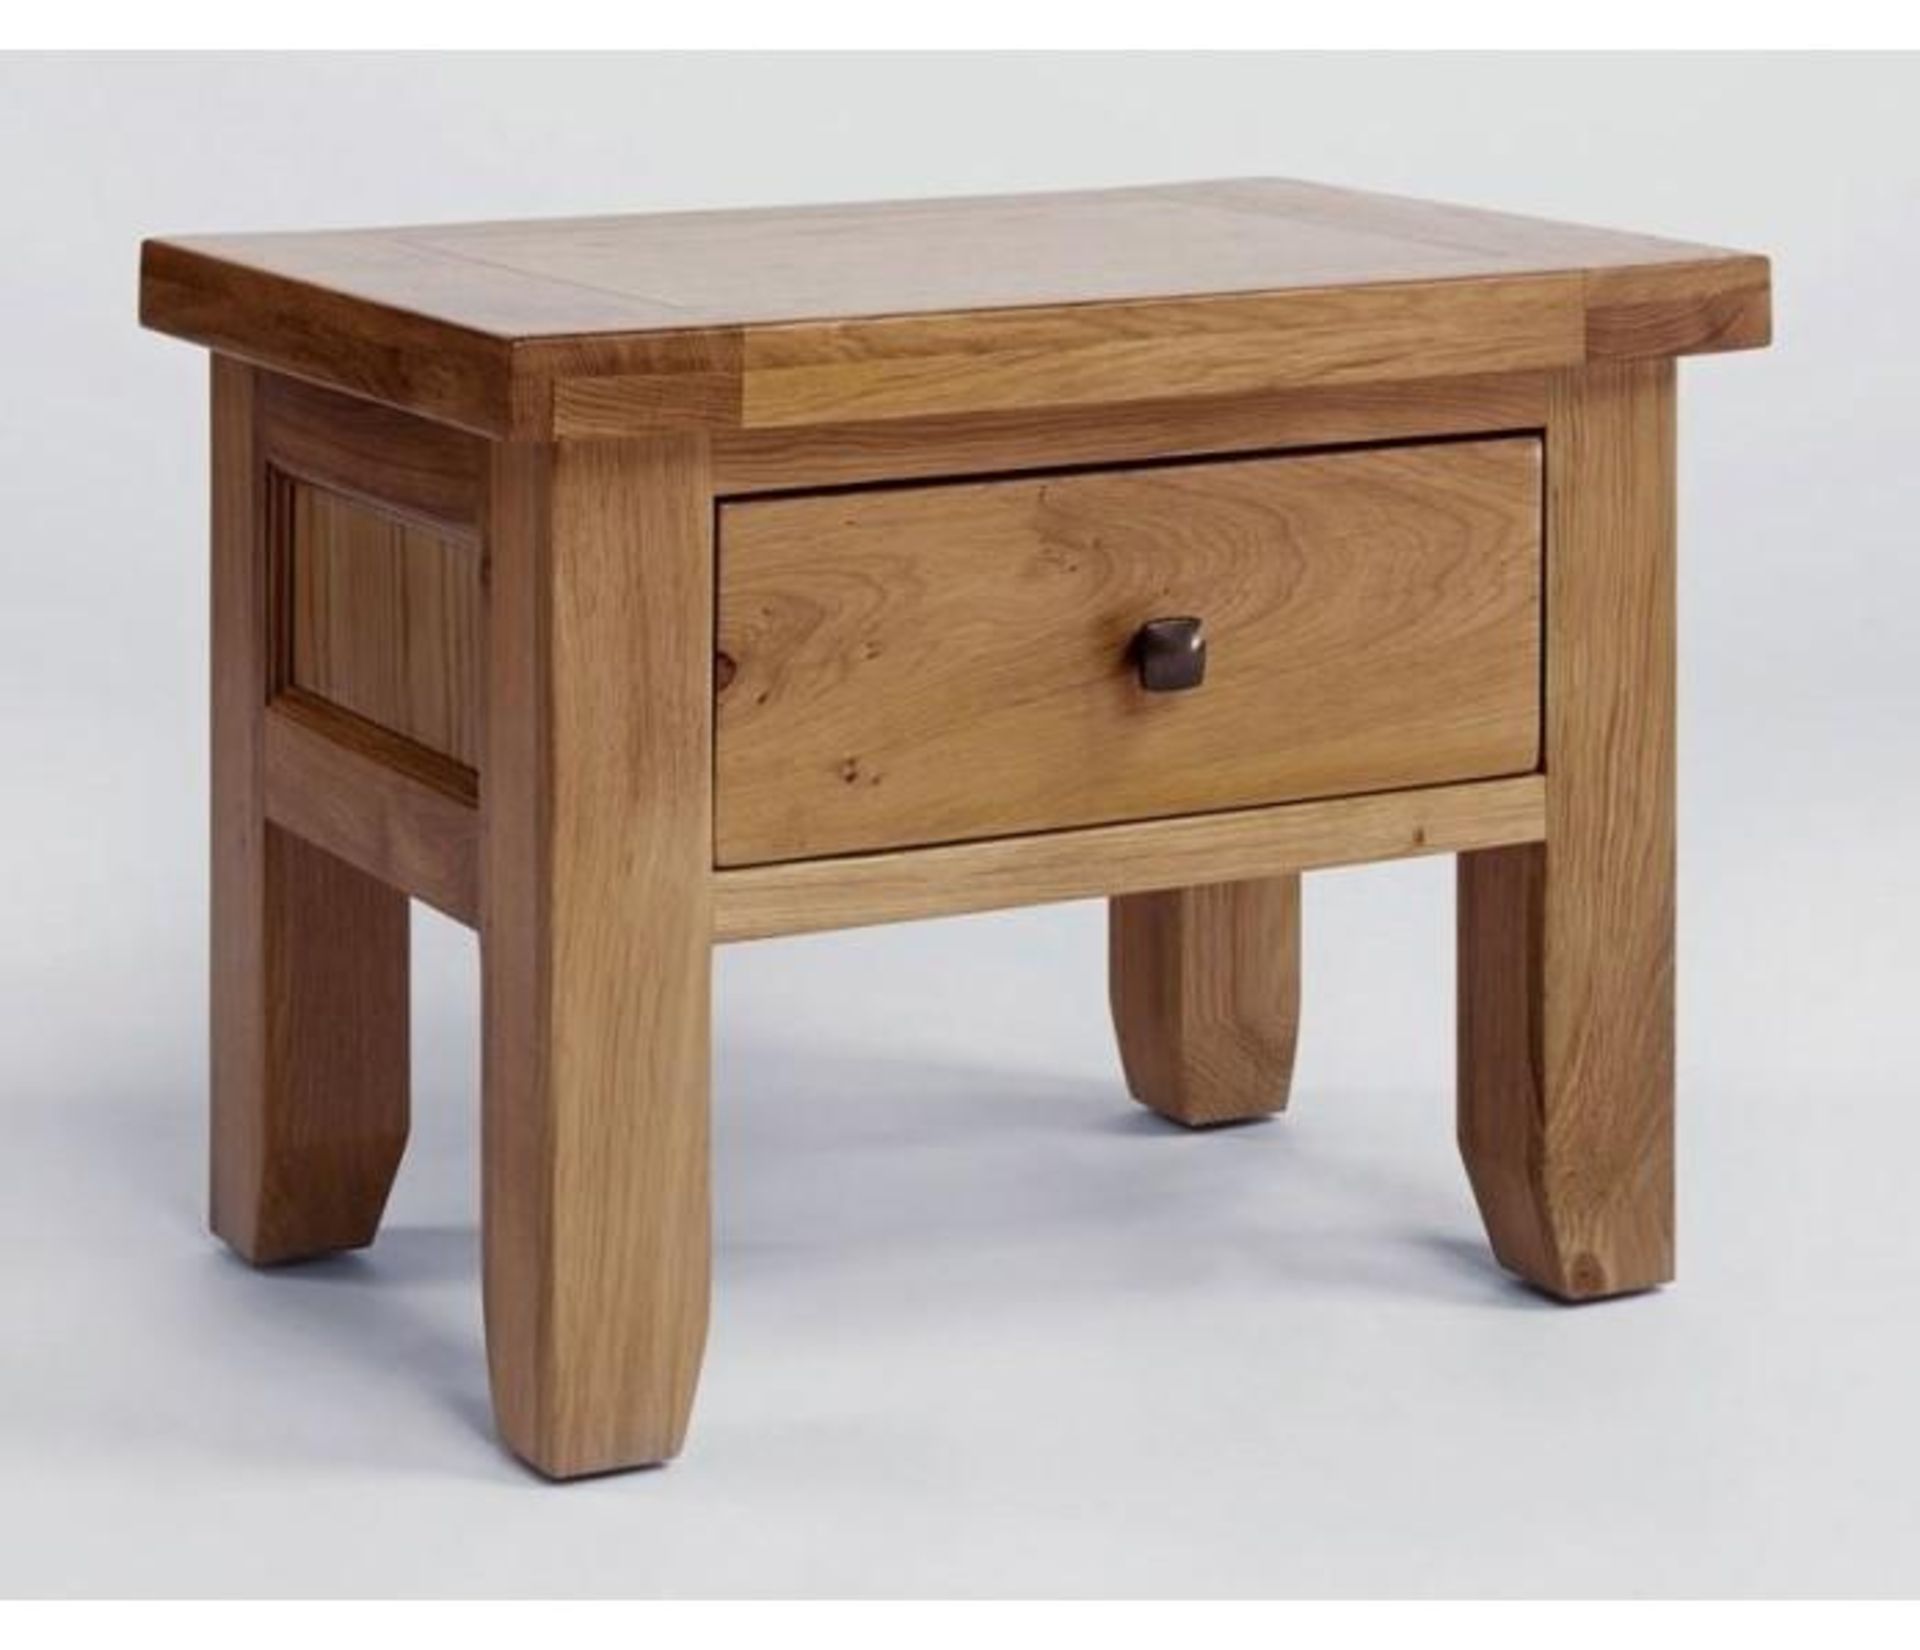 BRAND NEW & BOXED Devon oak side table with drawer